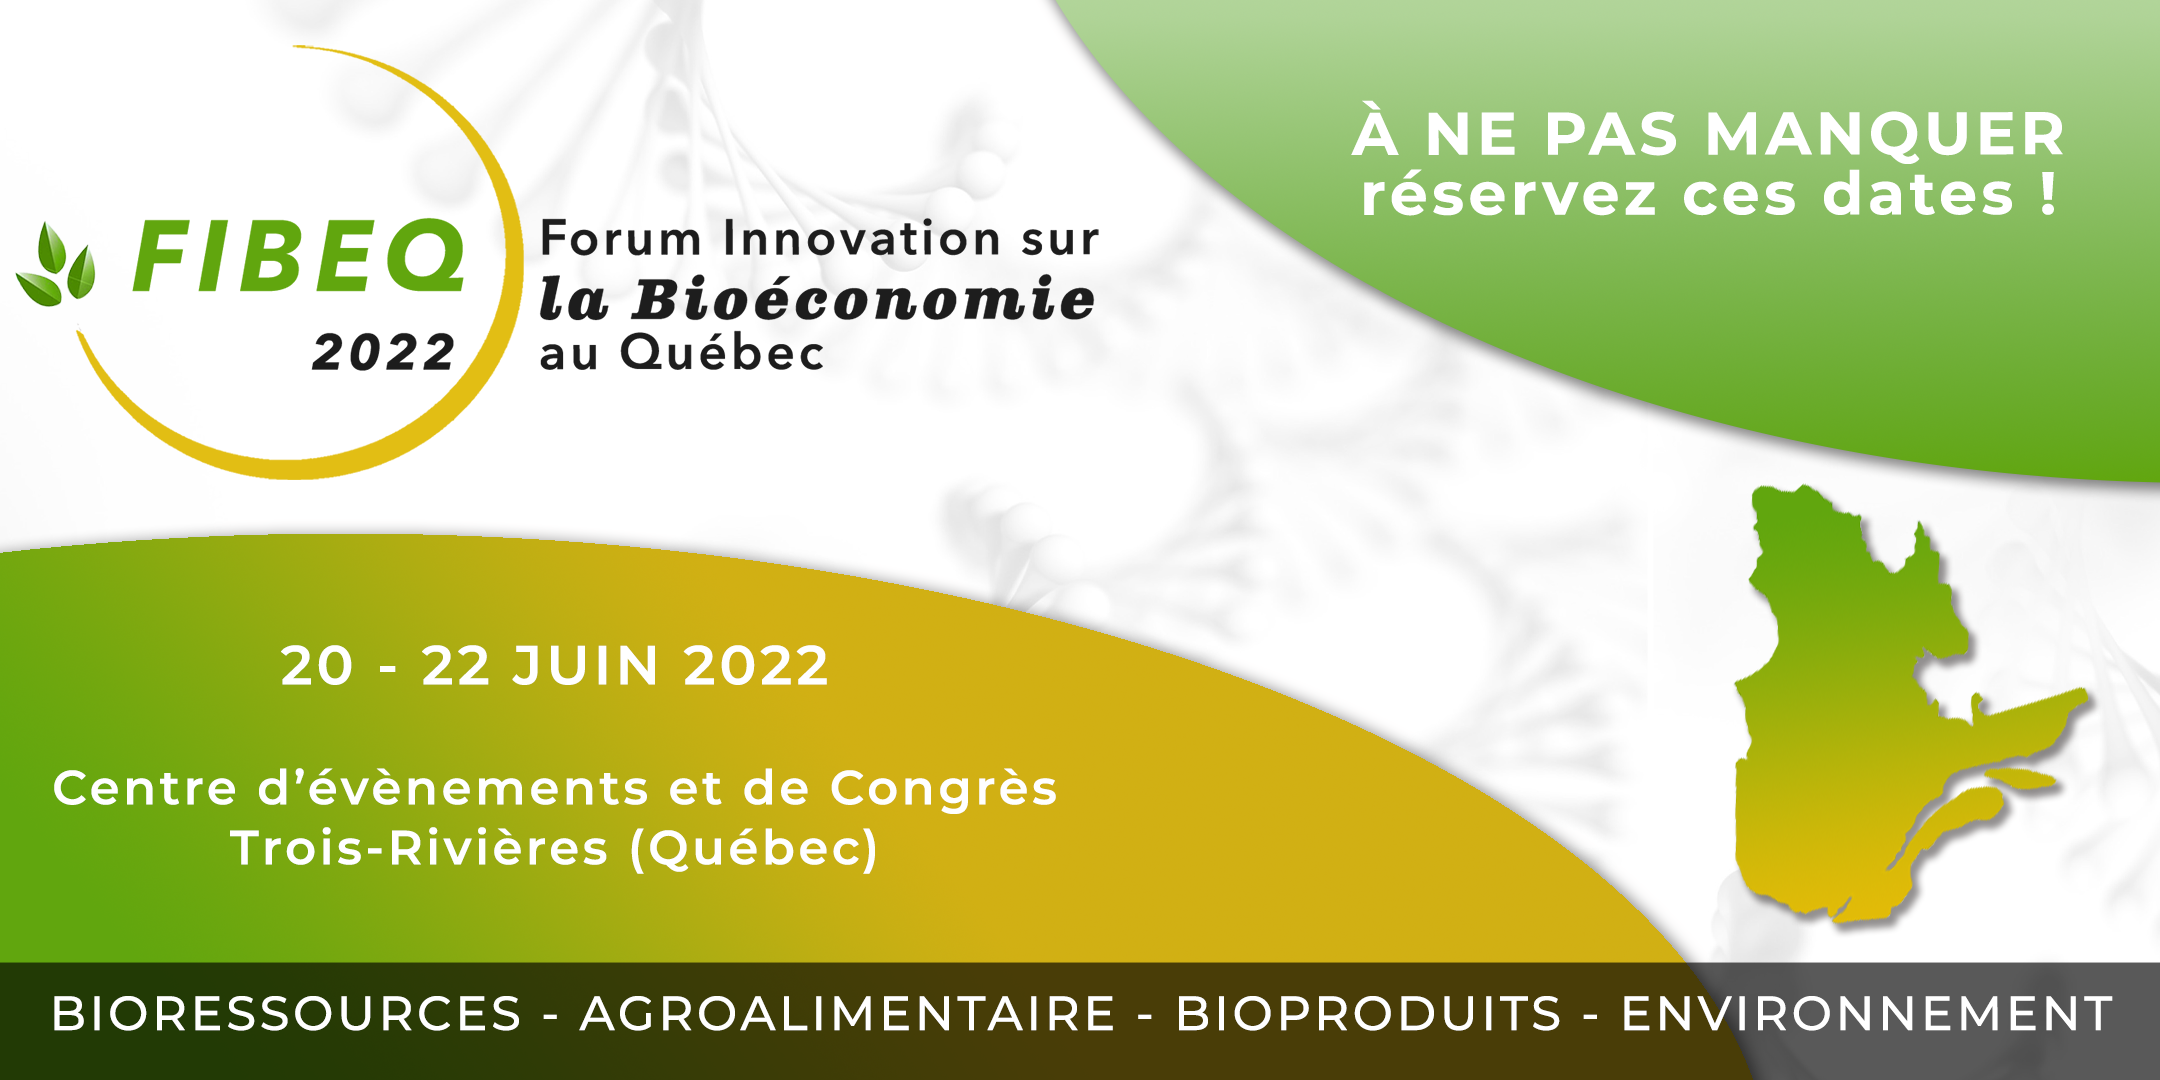 Second Edition of the Forum Innovation on the Bioeconomy in Quebec – FIBEQ 2022